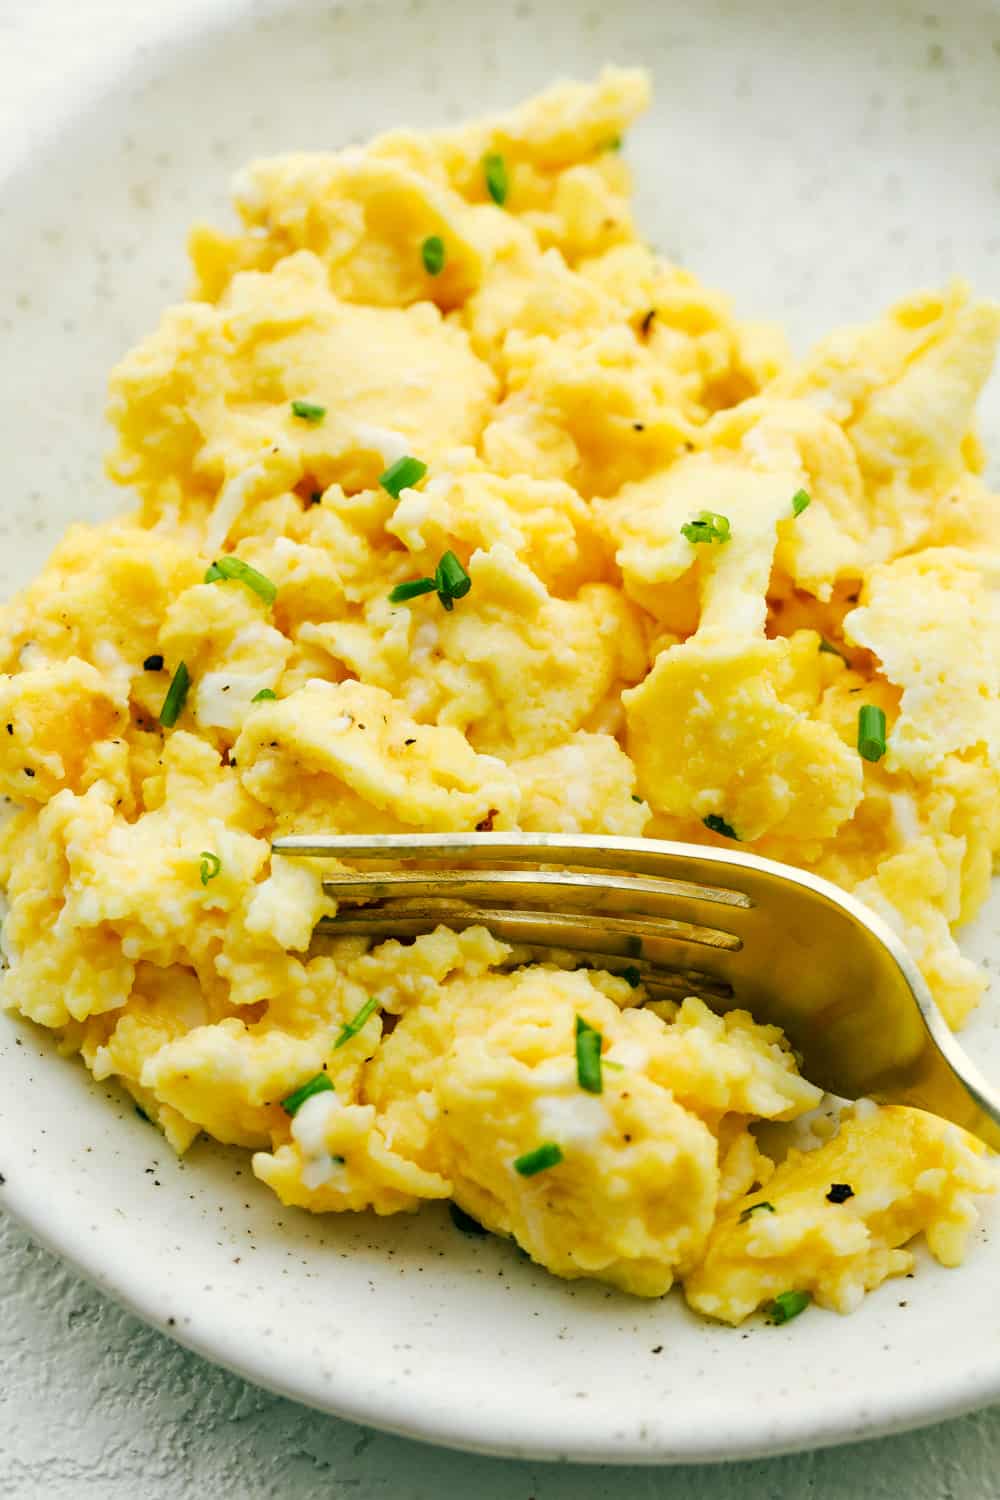 Perfectly soft, fluffy and light scrambled eggs.